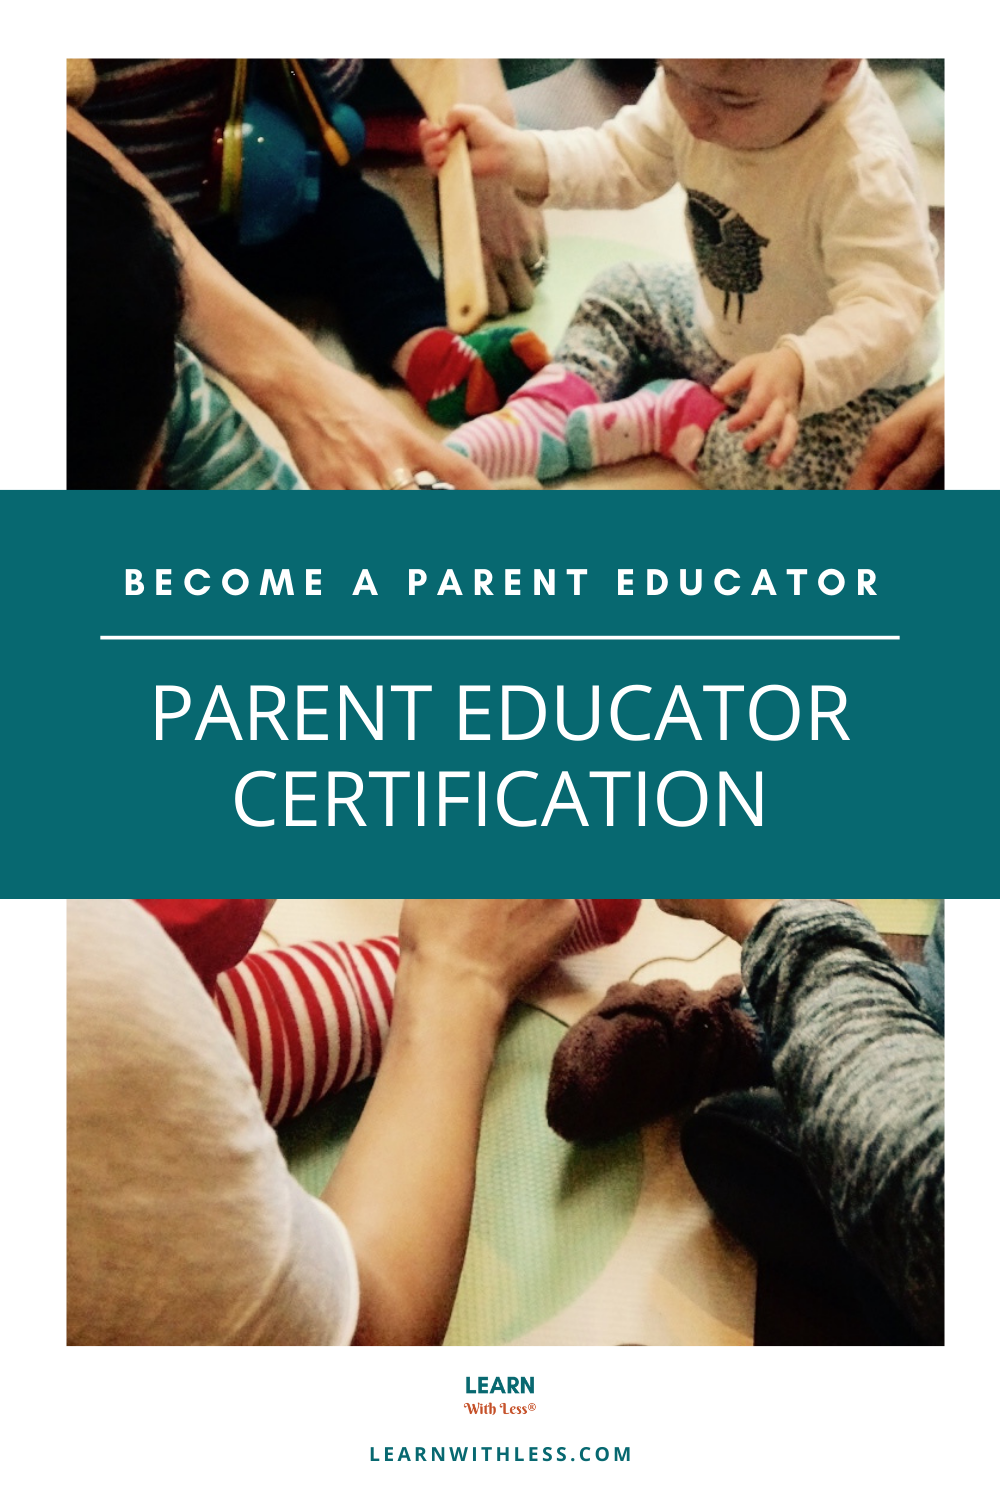 Parent Educator Certification: Learn With Less®